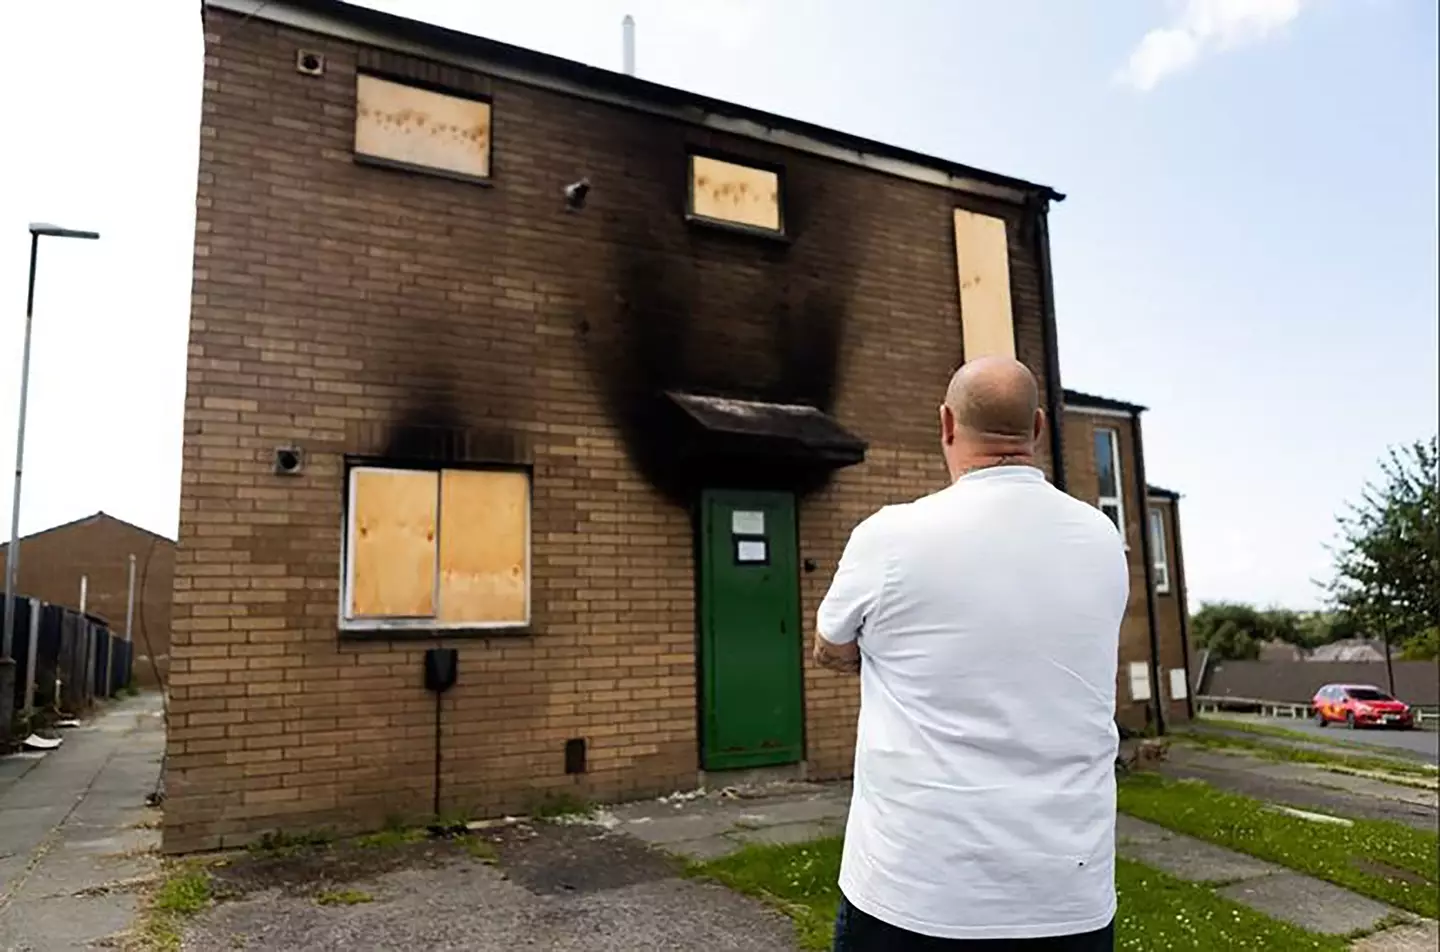 The dad 'was left with nothing' after the fire.